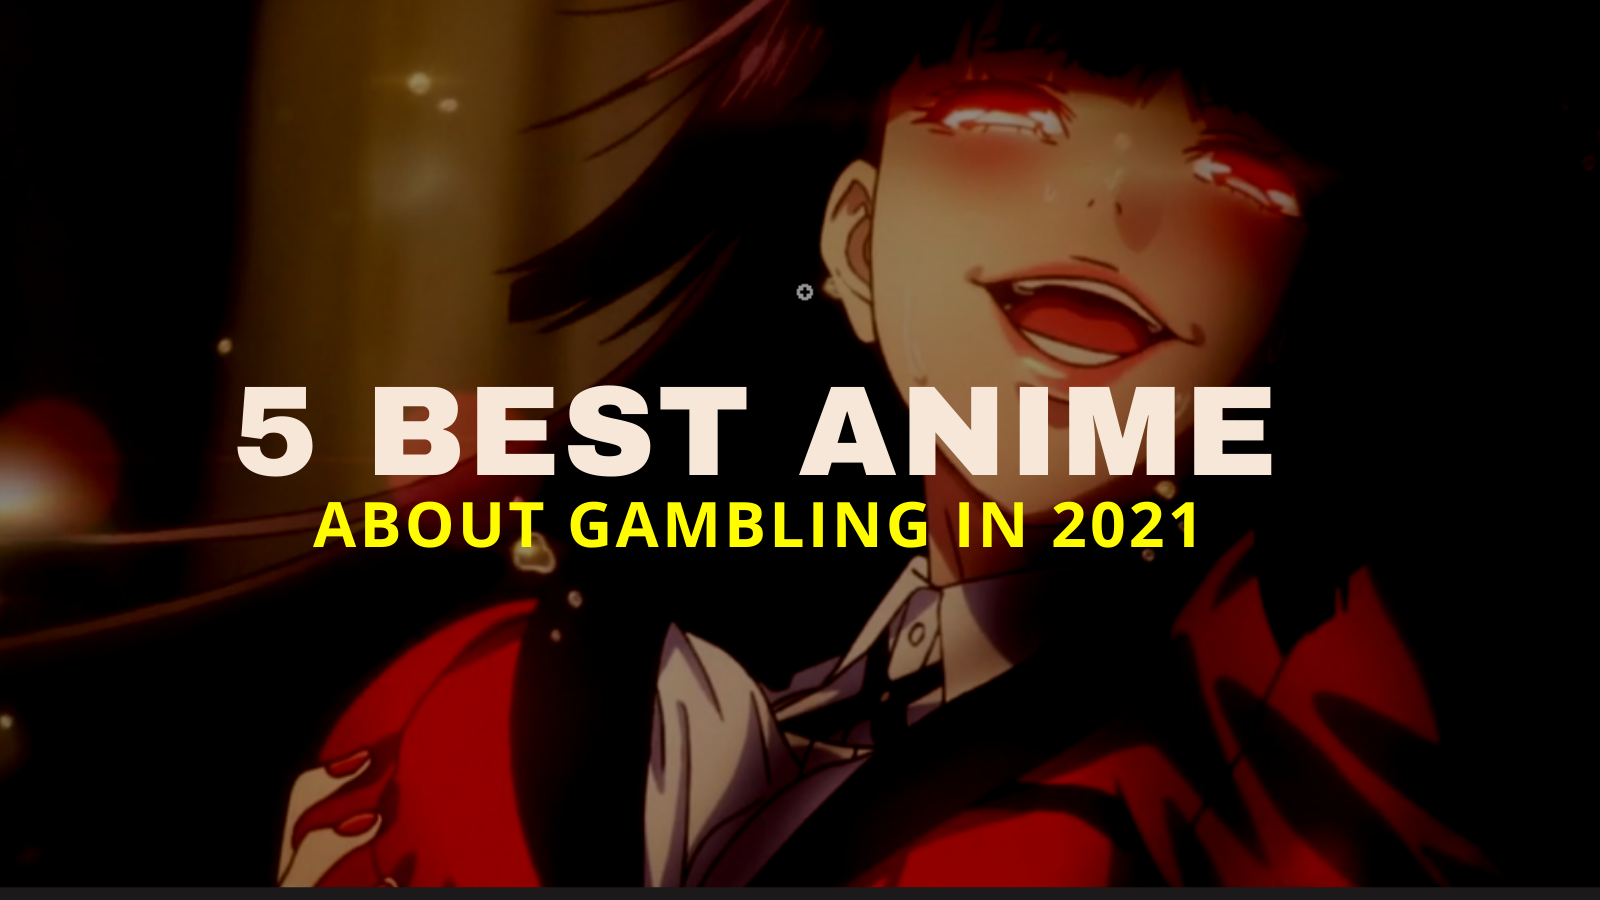 Read more about the article 5 Best Anime About Gambling That You Must Watch in 2021<div class="yasr-vv-stars-title-container"><div class='yasr-stars-title yasr-rater-stars'
                          id='yasr-visitor-votes-readonly-rater-054321647e976'
                          data-rating='0'
                          data-rater-starsize='16'
                          data-rater-postid='2654'
                          data-rater-readonly='true'
                          data-readonly-attribute='true'
                      ></div><span class='yasr-stars-title-average'>0 (0)</span></div>